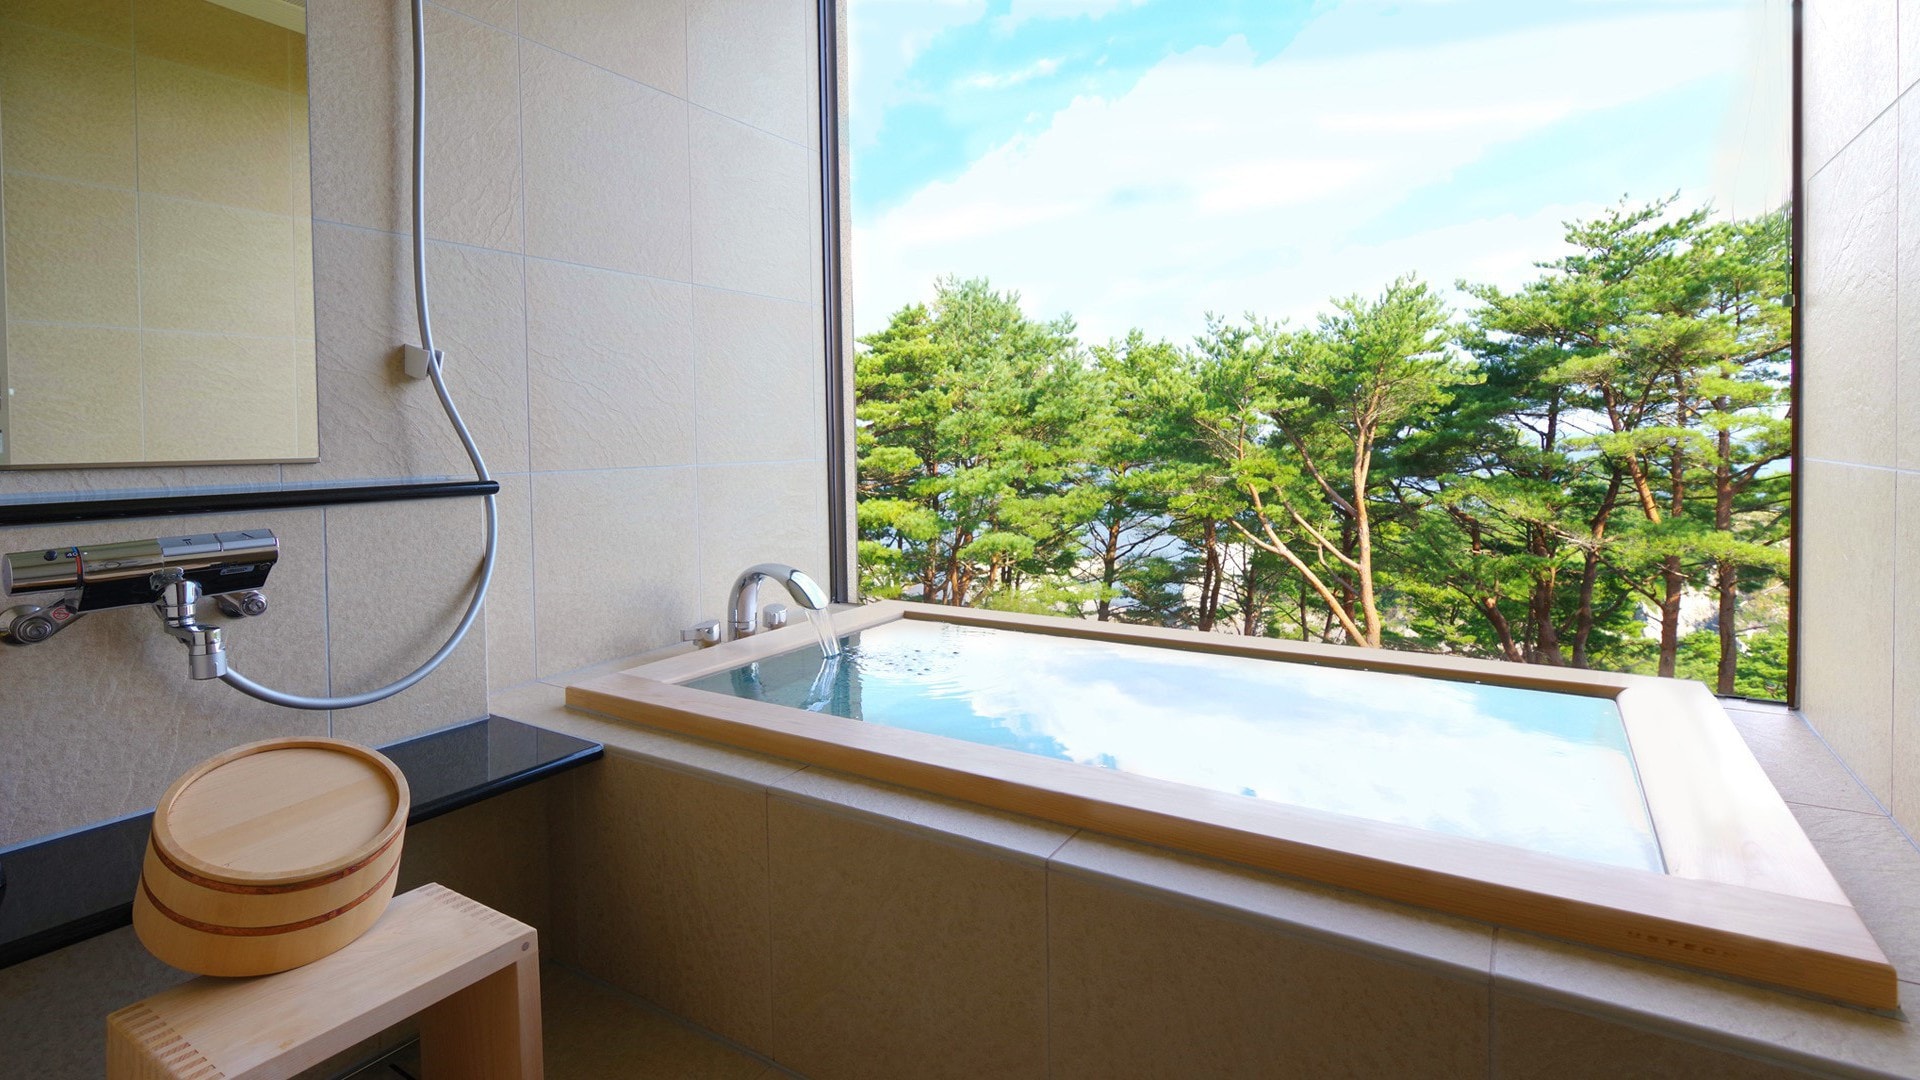 The view from the room bath is just a masterpiece. Superb room_twin with view bath